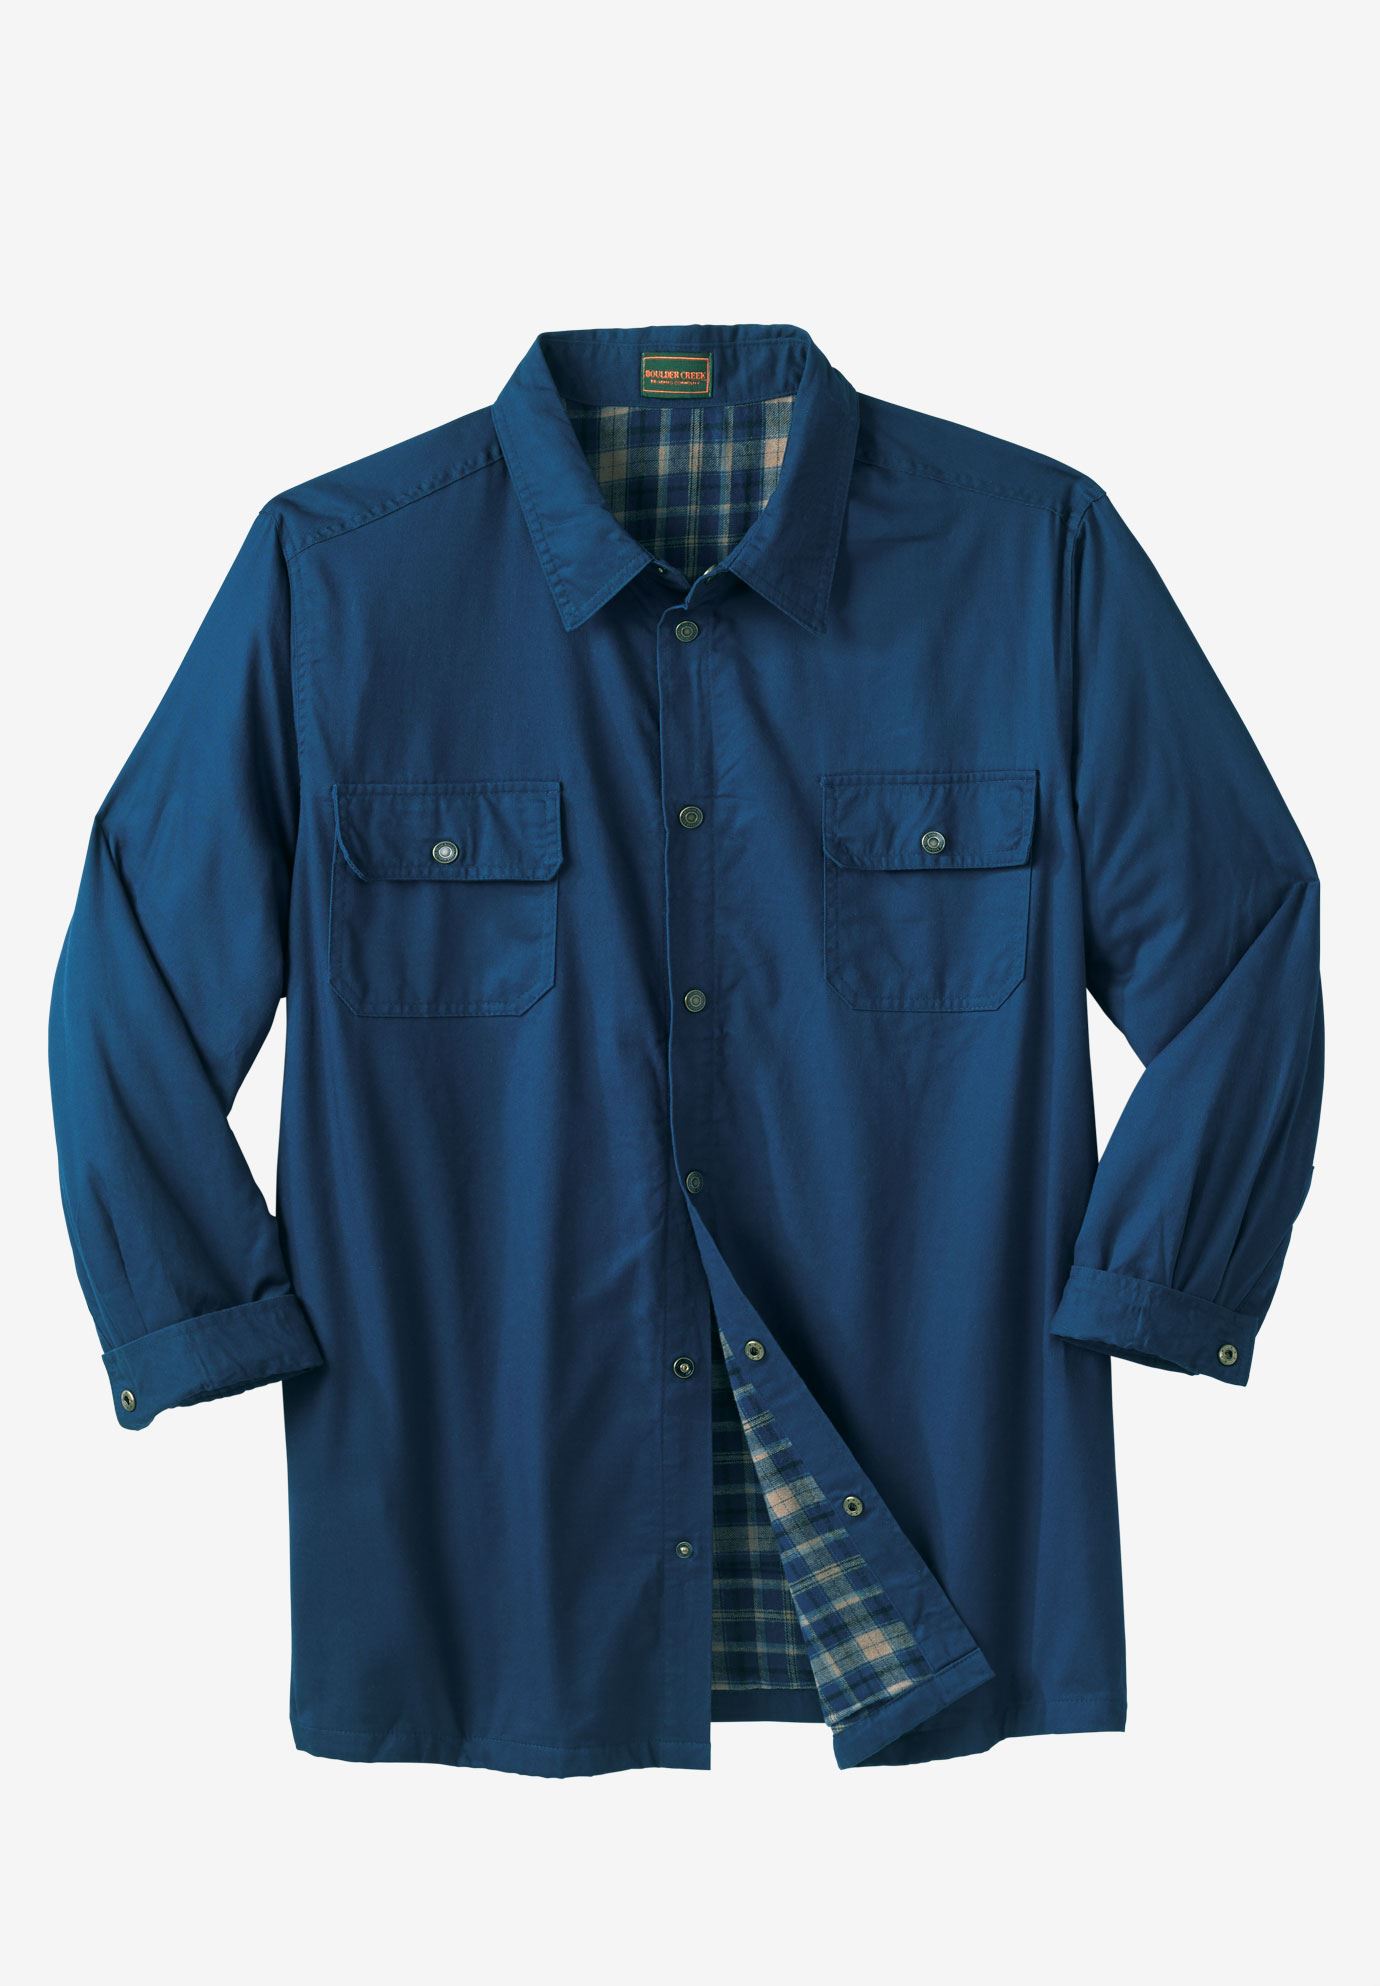 Flannel Lined Twill Shirt Jacket By Boulder Creek® Big And Tall Flannel Shirts King Size